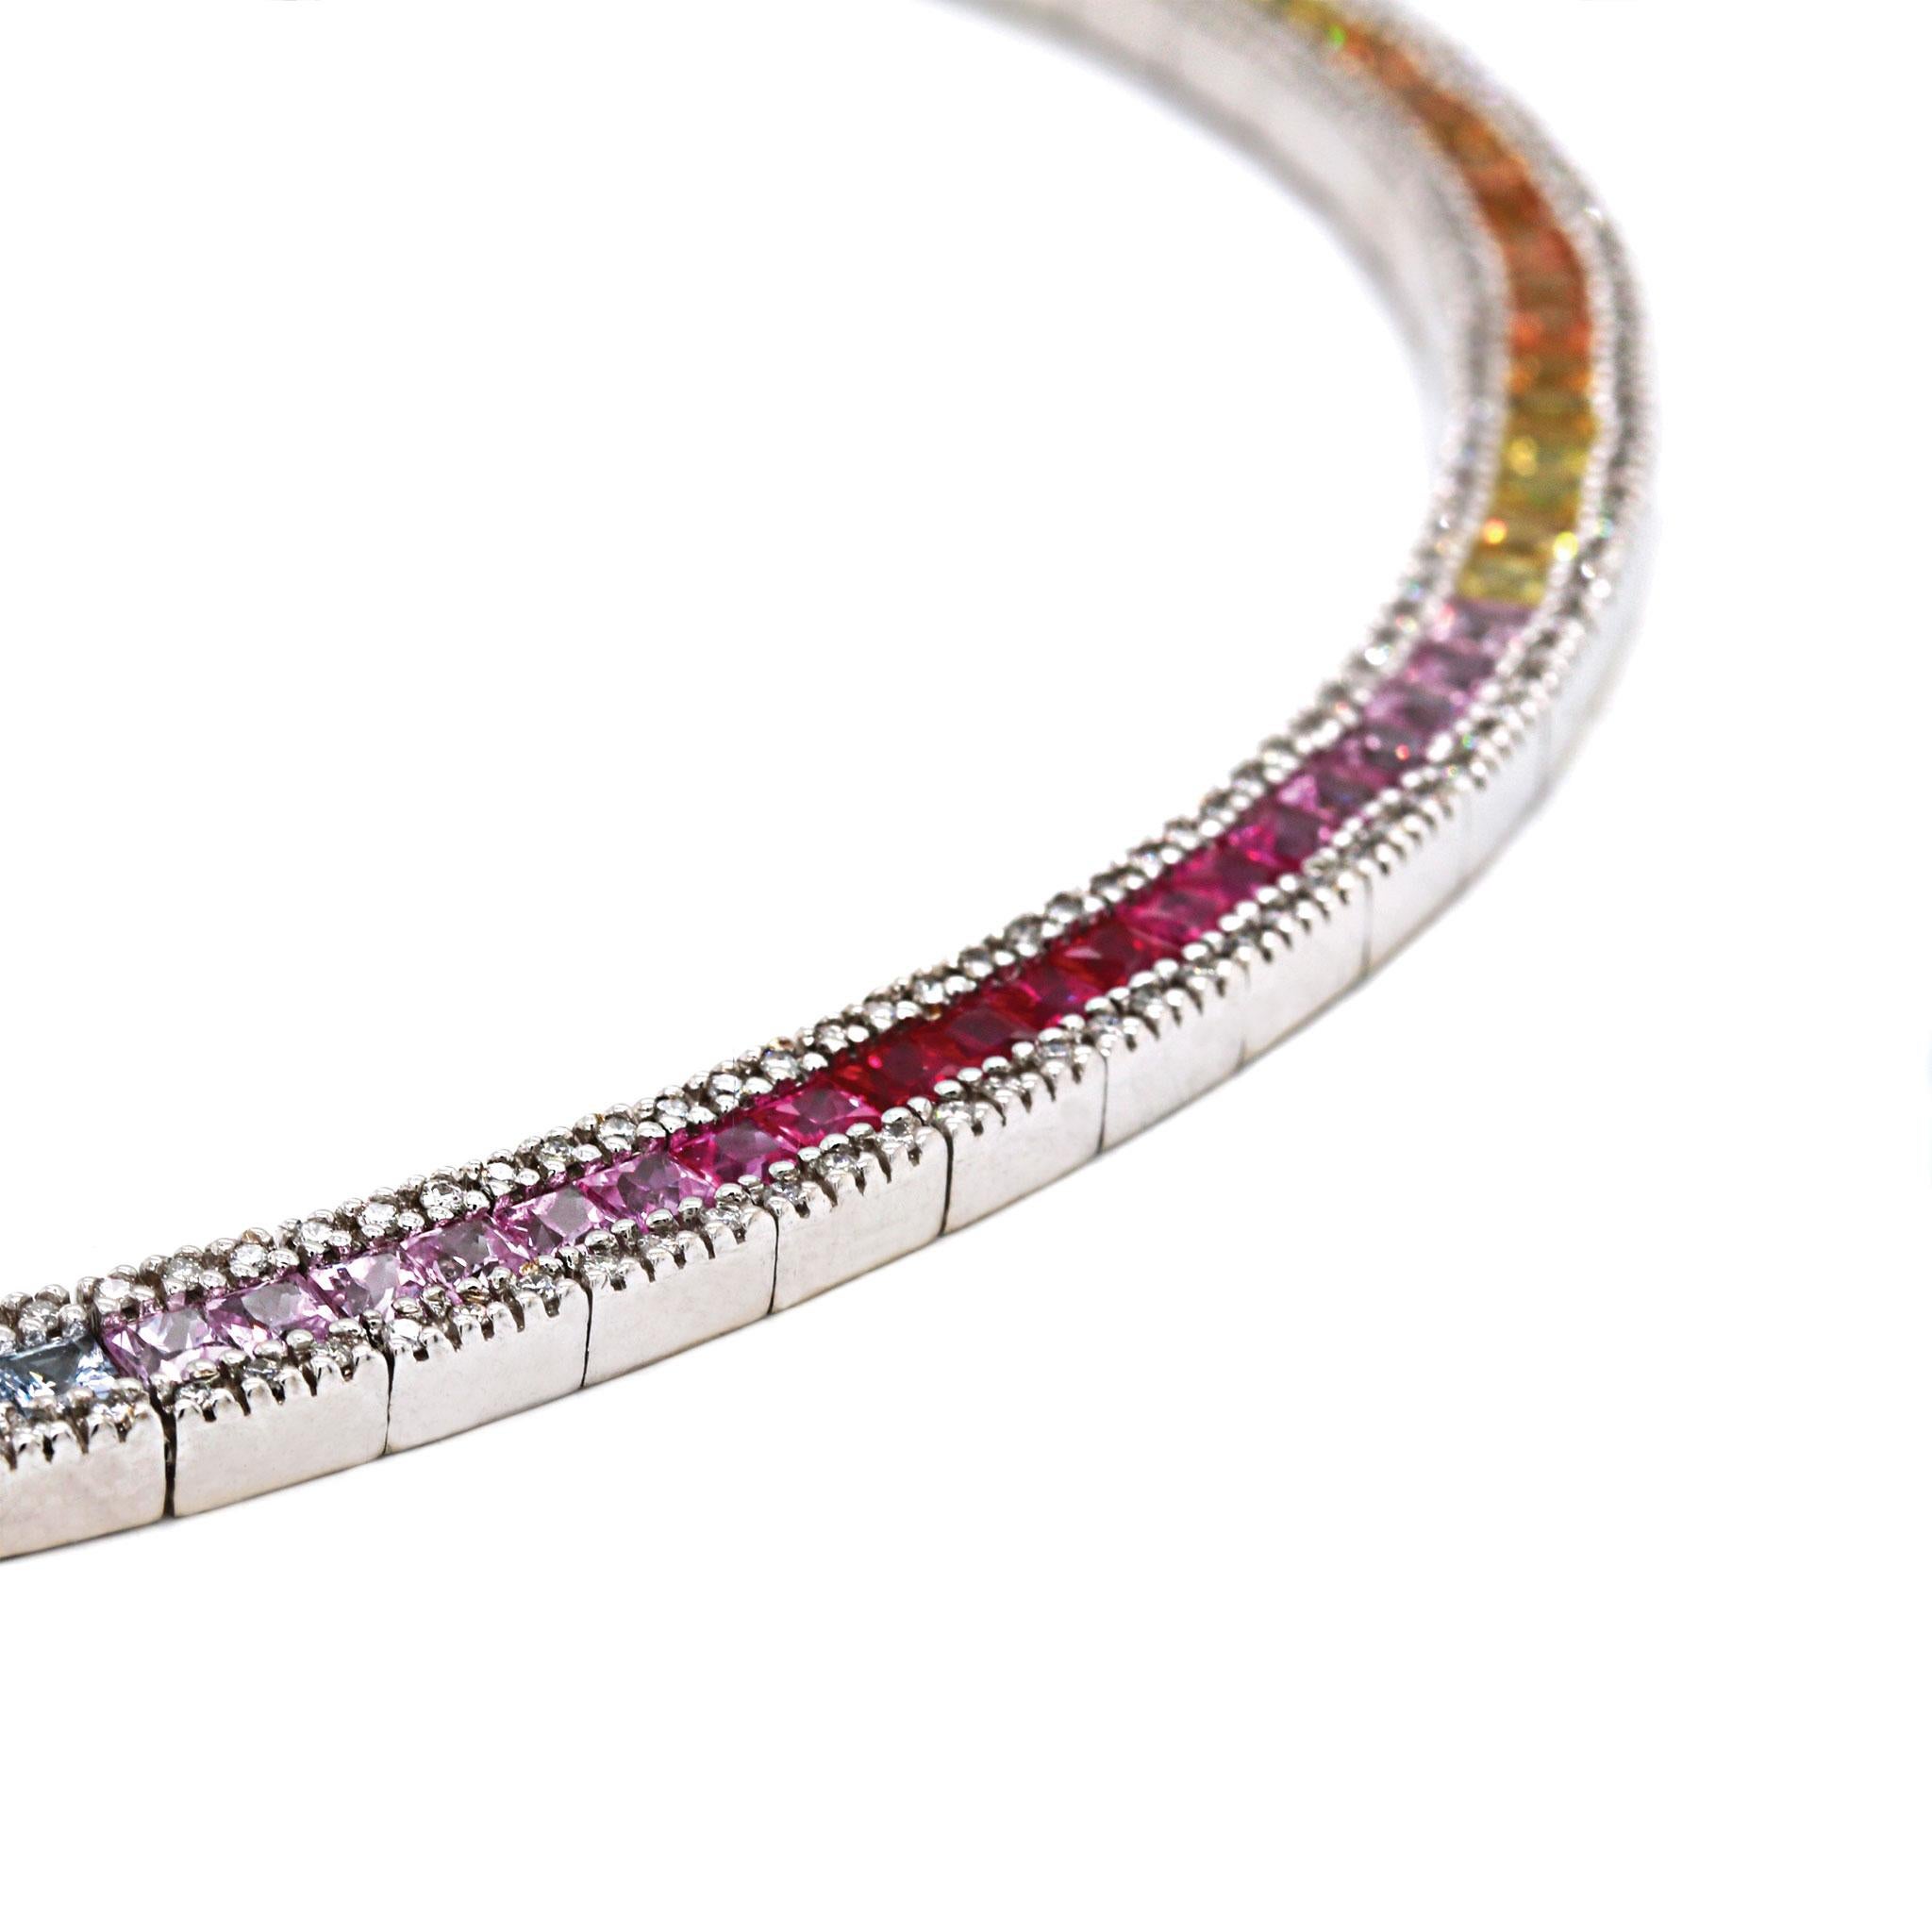 A uniquely luxurious rainbow sapphire link necklace with diamond and gold accents. The solid 14K white gold chain features 8.42ctw of gradient multi-colored gemstones displaying the spectrum of natural sapphire hues. Featuring 1.22ctw of H-I/SI1-2